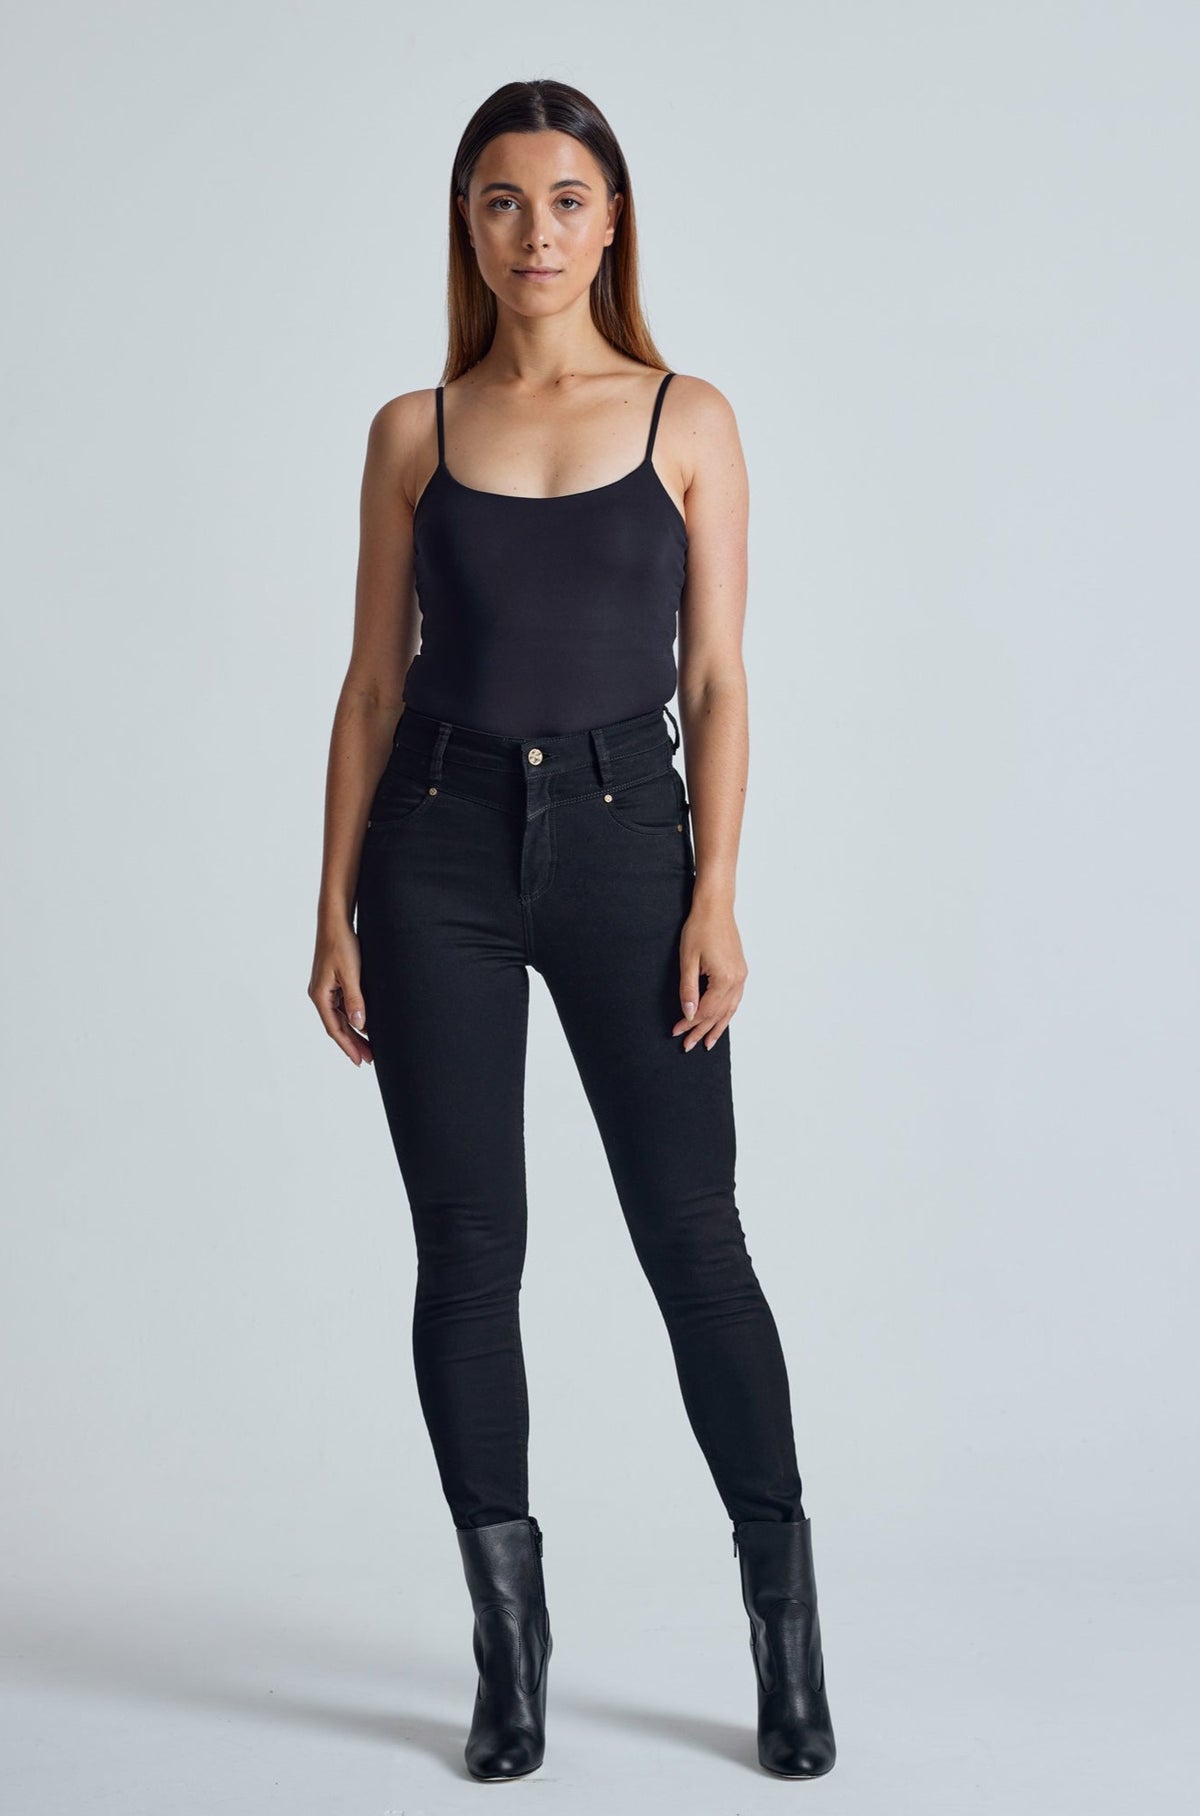 Ebony Nina High Waisted Skinny Jeans - GOTS Certified Organic Cotton and Recycled Polyester